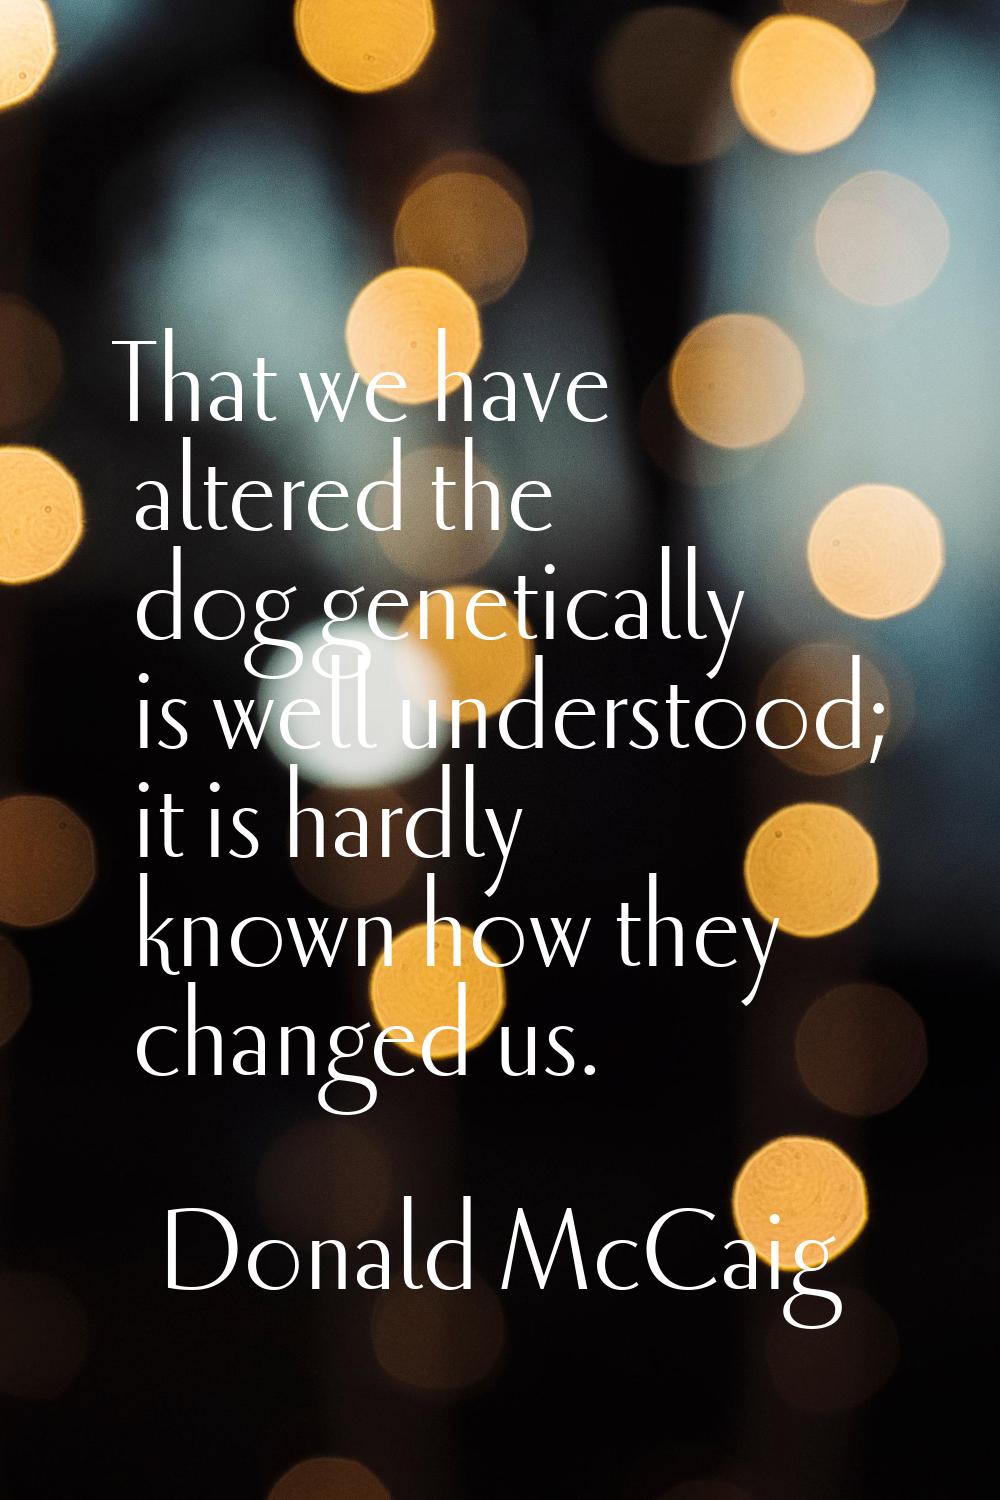 That we have altered the dog genetically is well understood; it is hardly known how they changed us